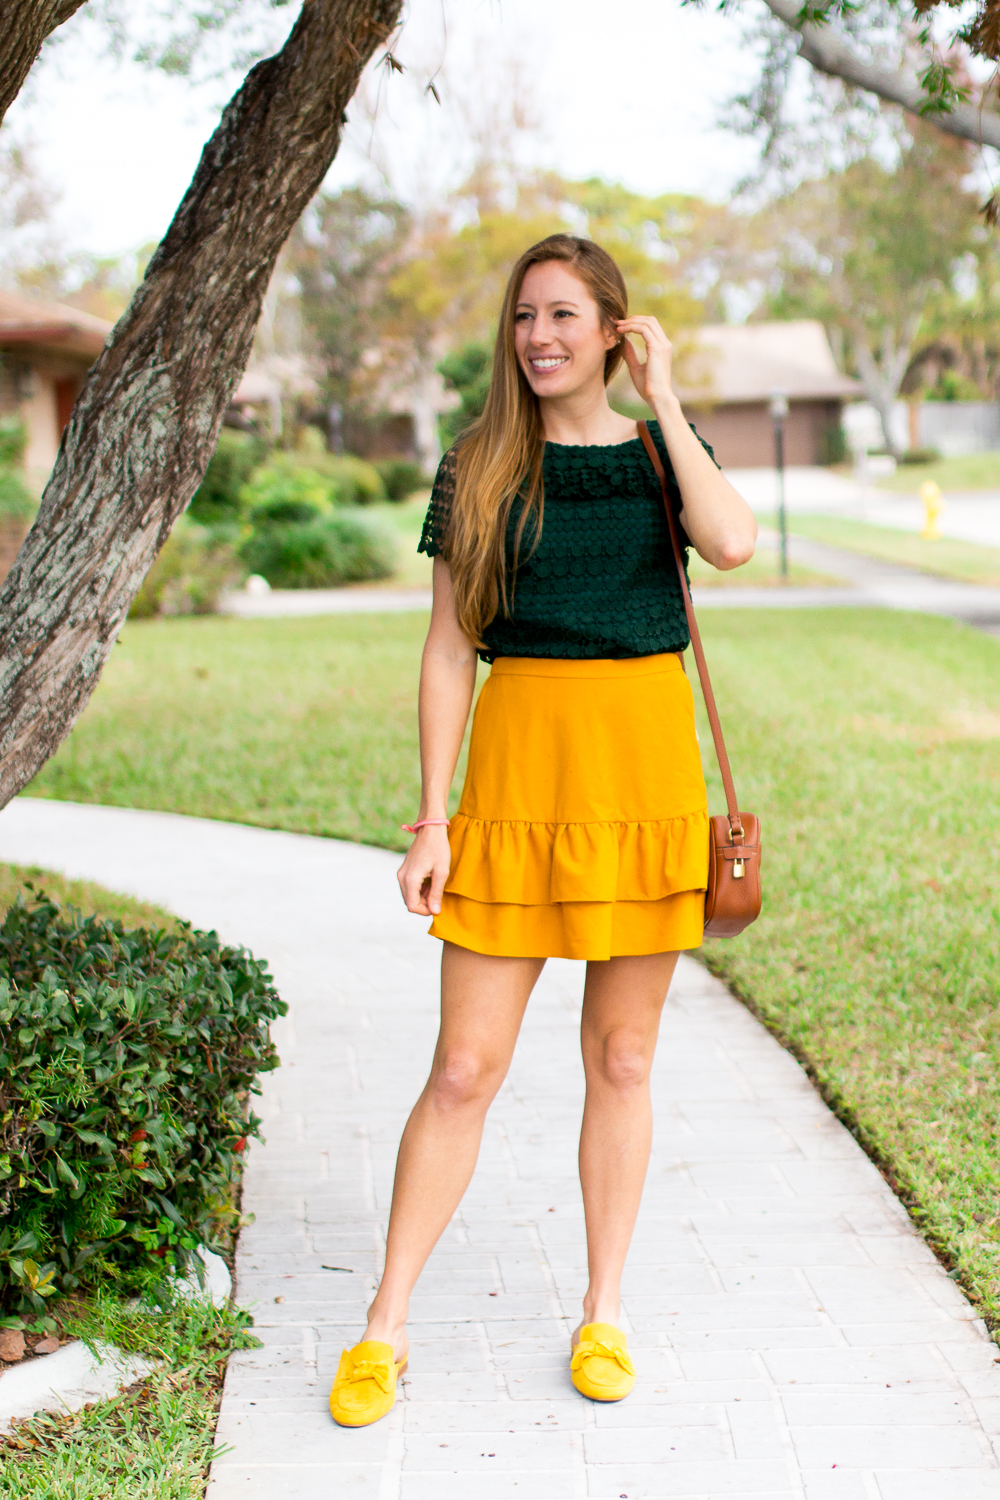 Mixing and Matching Seasonal Colors into Your Wardrobe | How to Dress for Fall | How to Incorporate Fall Colors in Your Wardrobe | Fall Outfit Ideas 2018 | Mustard Ruffle Skirt | Emerald Top | Mustard Loafer | Leather Bag - Sunshine Style